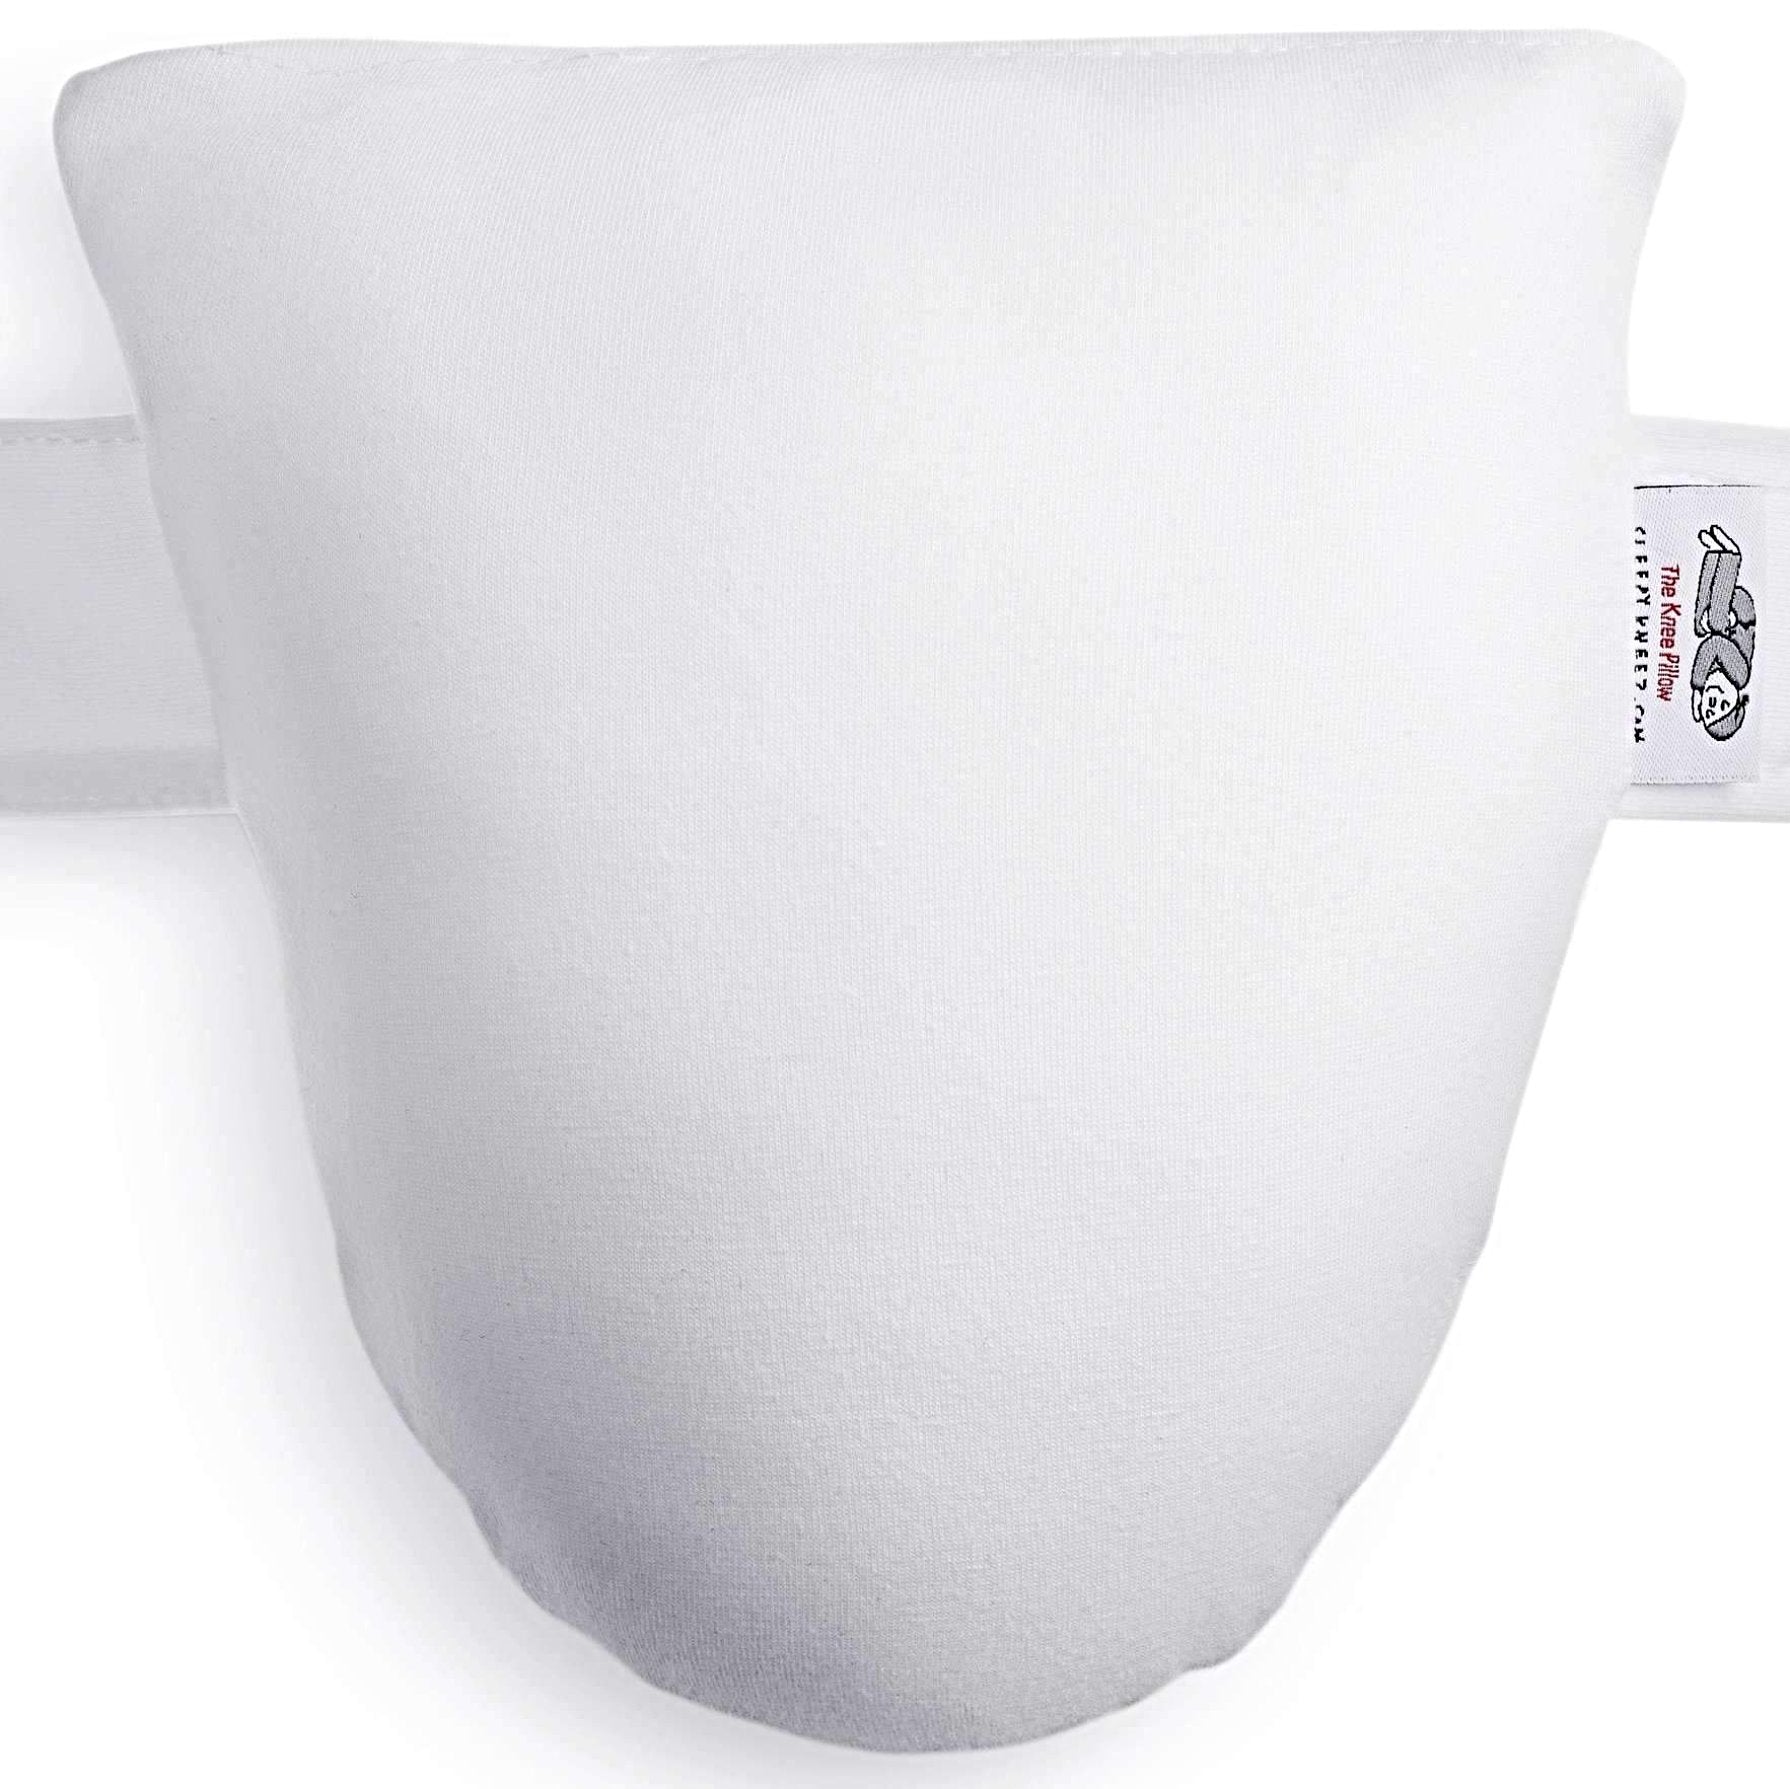 Our Newest Sleepy Kneez with Cotton/Spandex Cover  Buy Knee Pillow for  better sleep without back, hip & knee pain